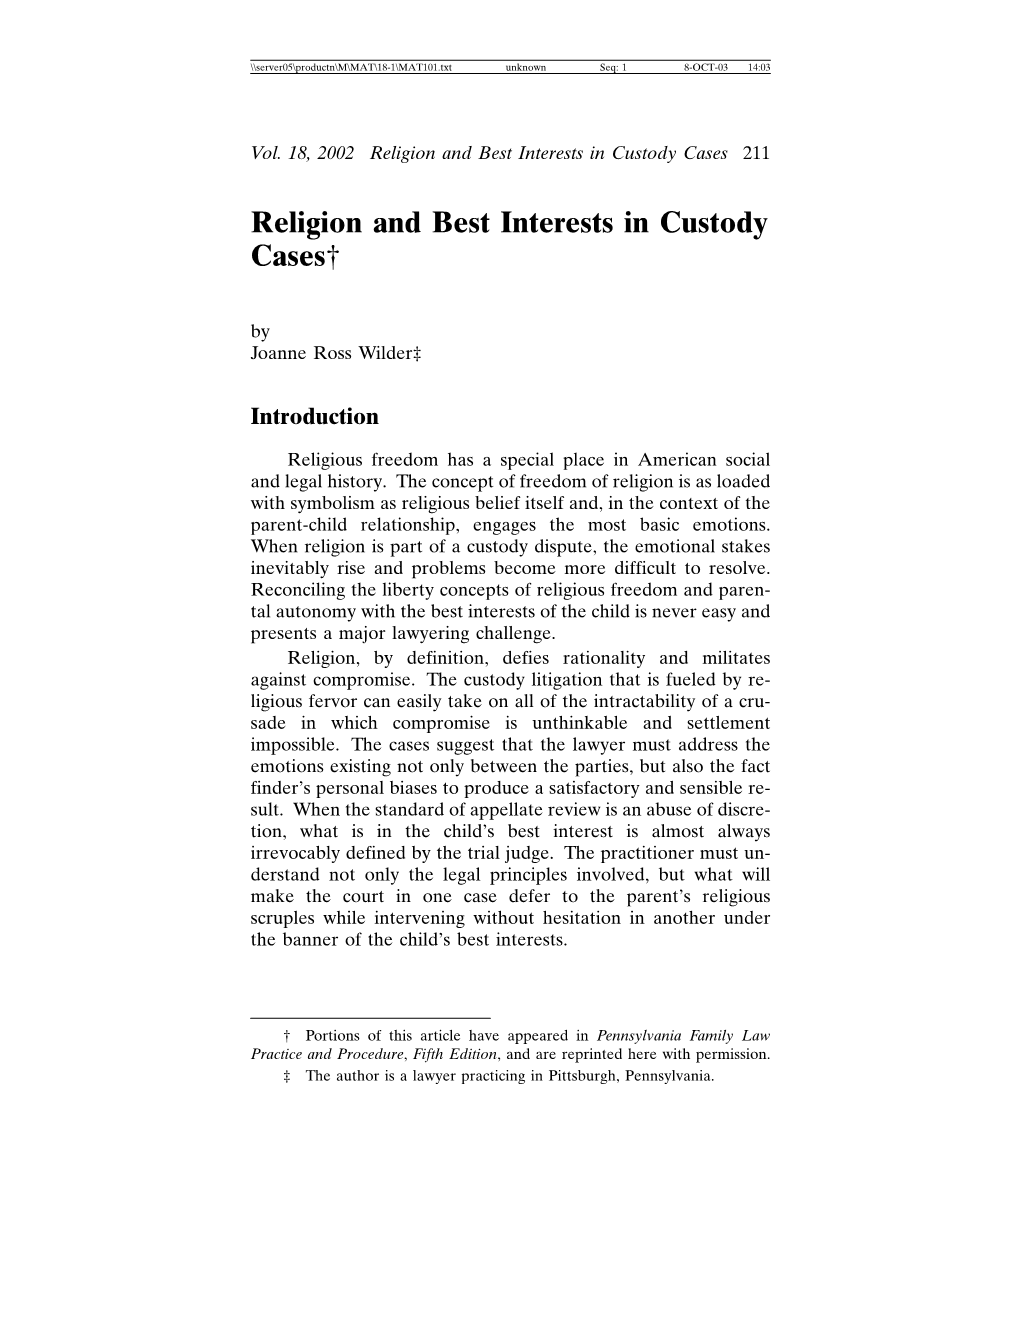 Religion and Best Interests in Custody Cases† by Joanne Ross Wilder‡